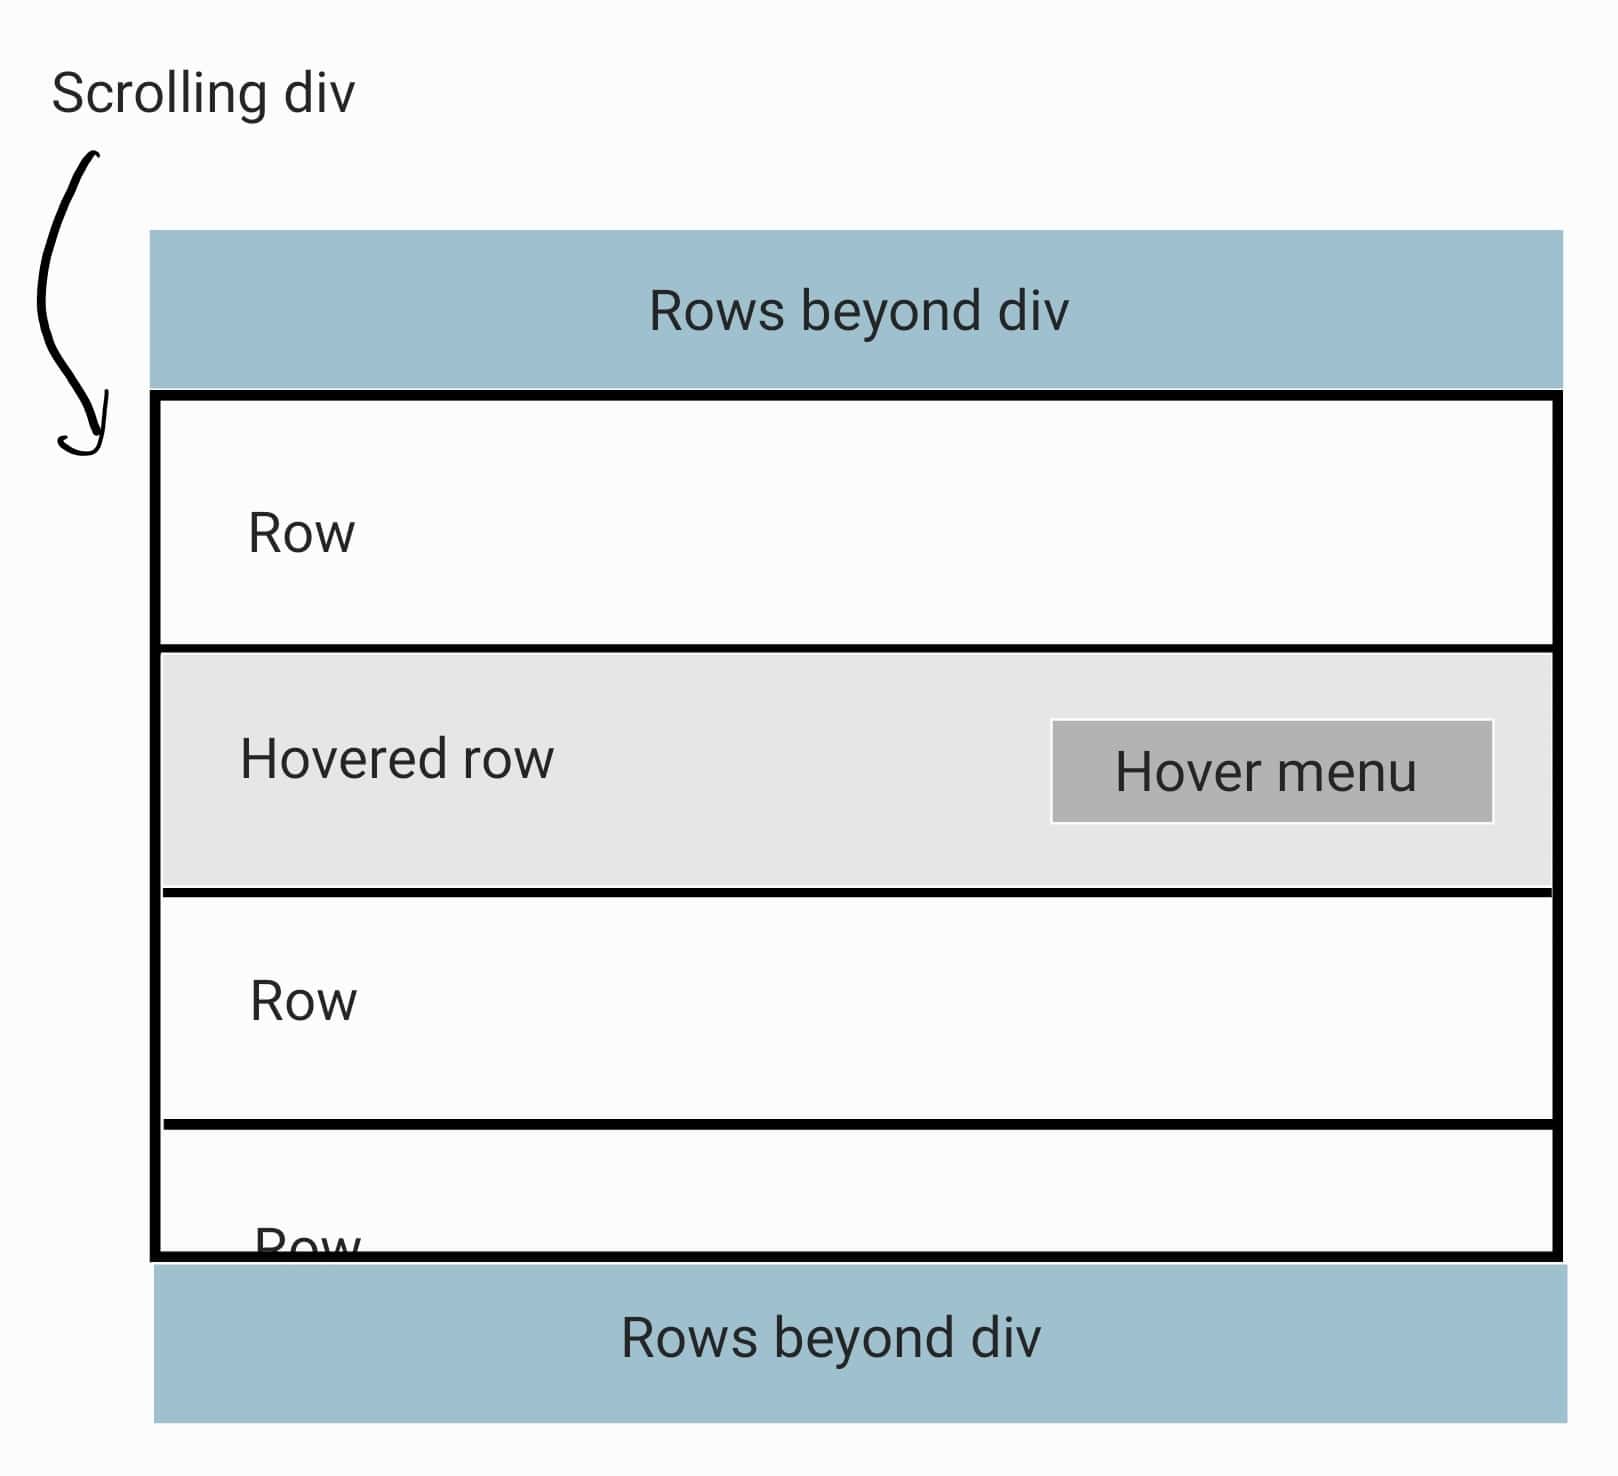 Diagram of hover menu on hovered row in scrolled div